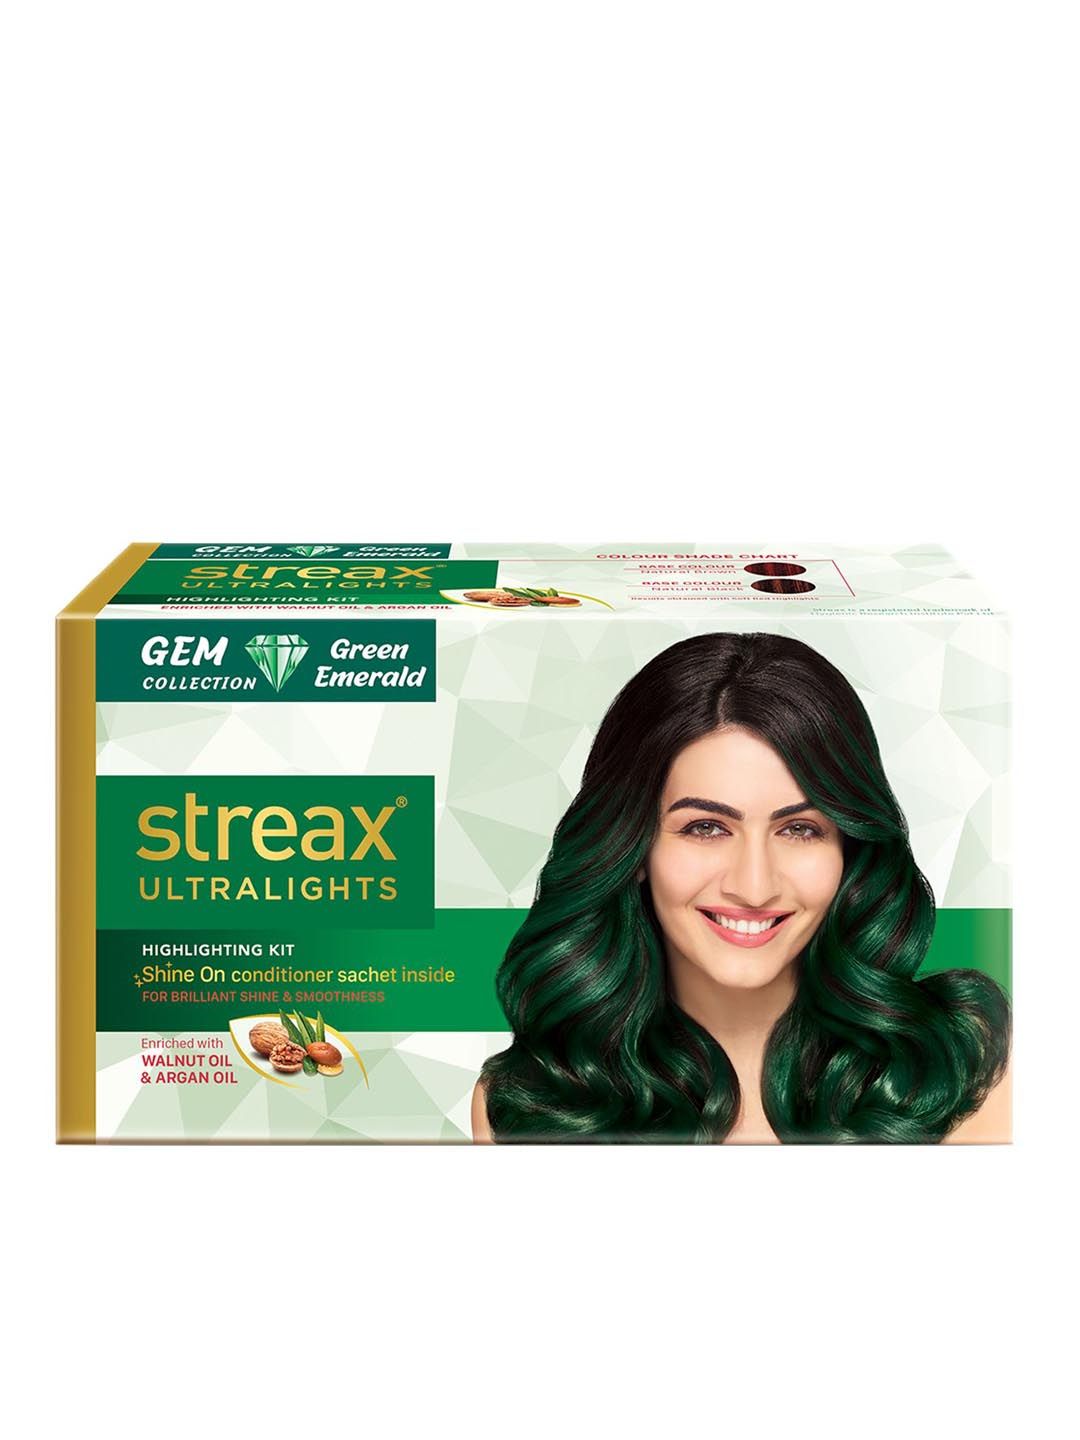 Streax Ultralights Gem Collection - Green Emerald 60ml Price in India